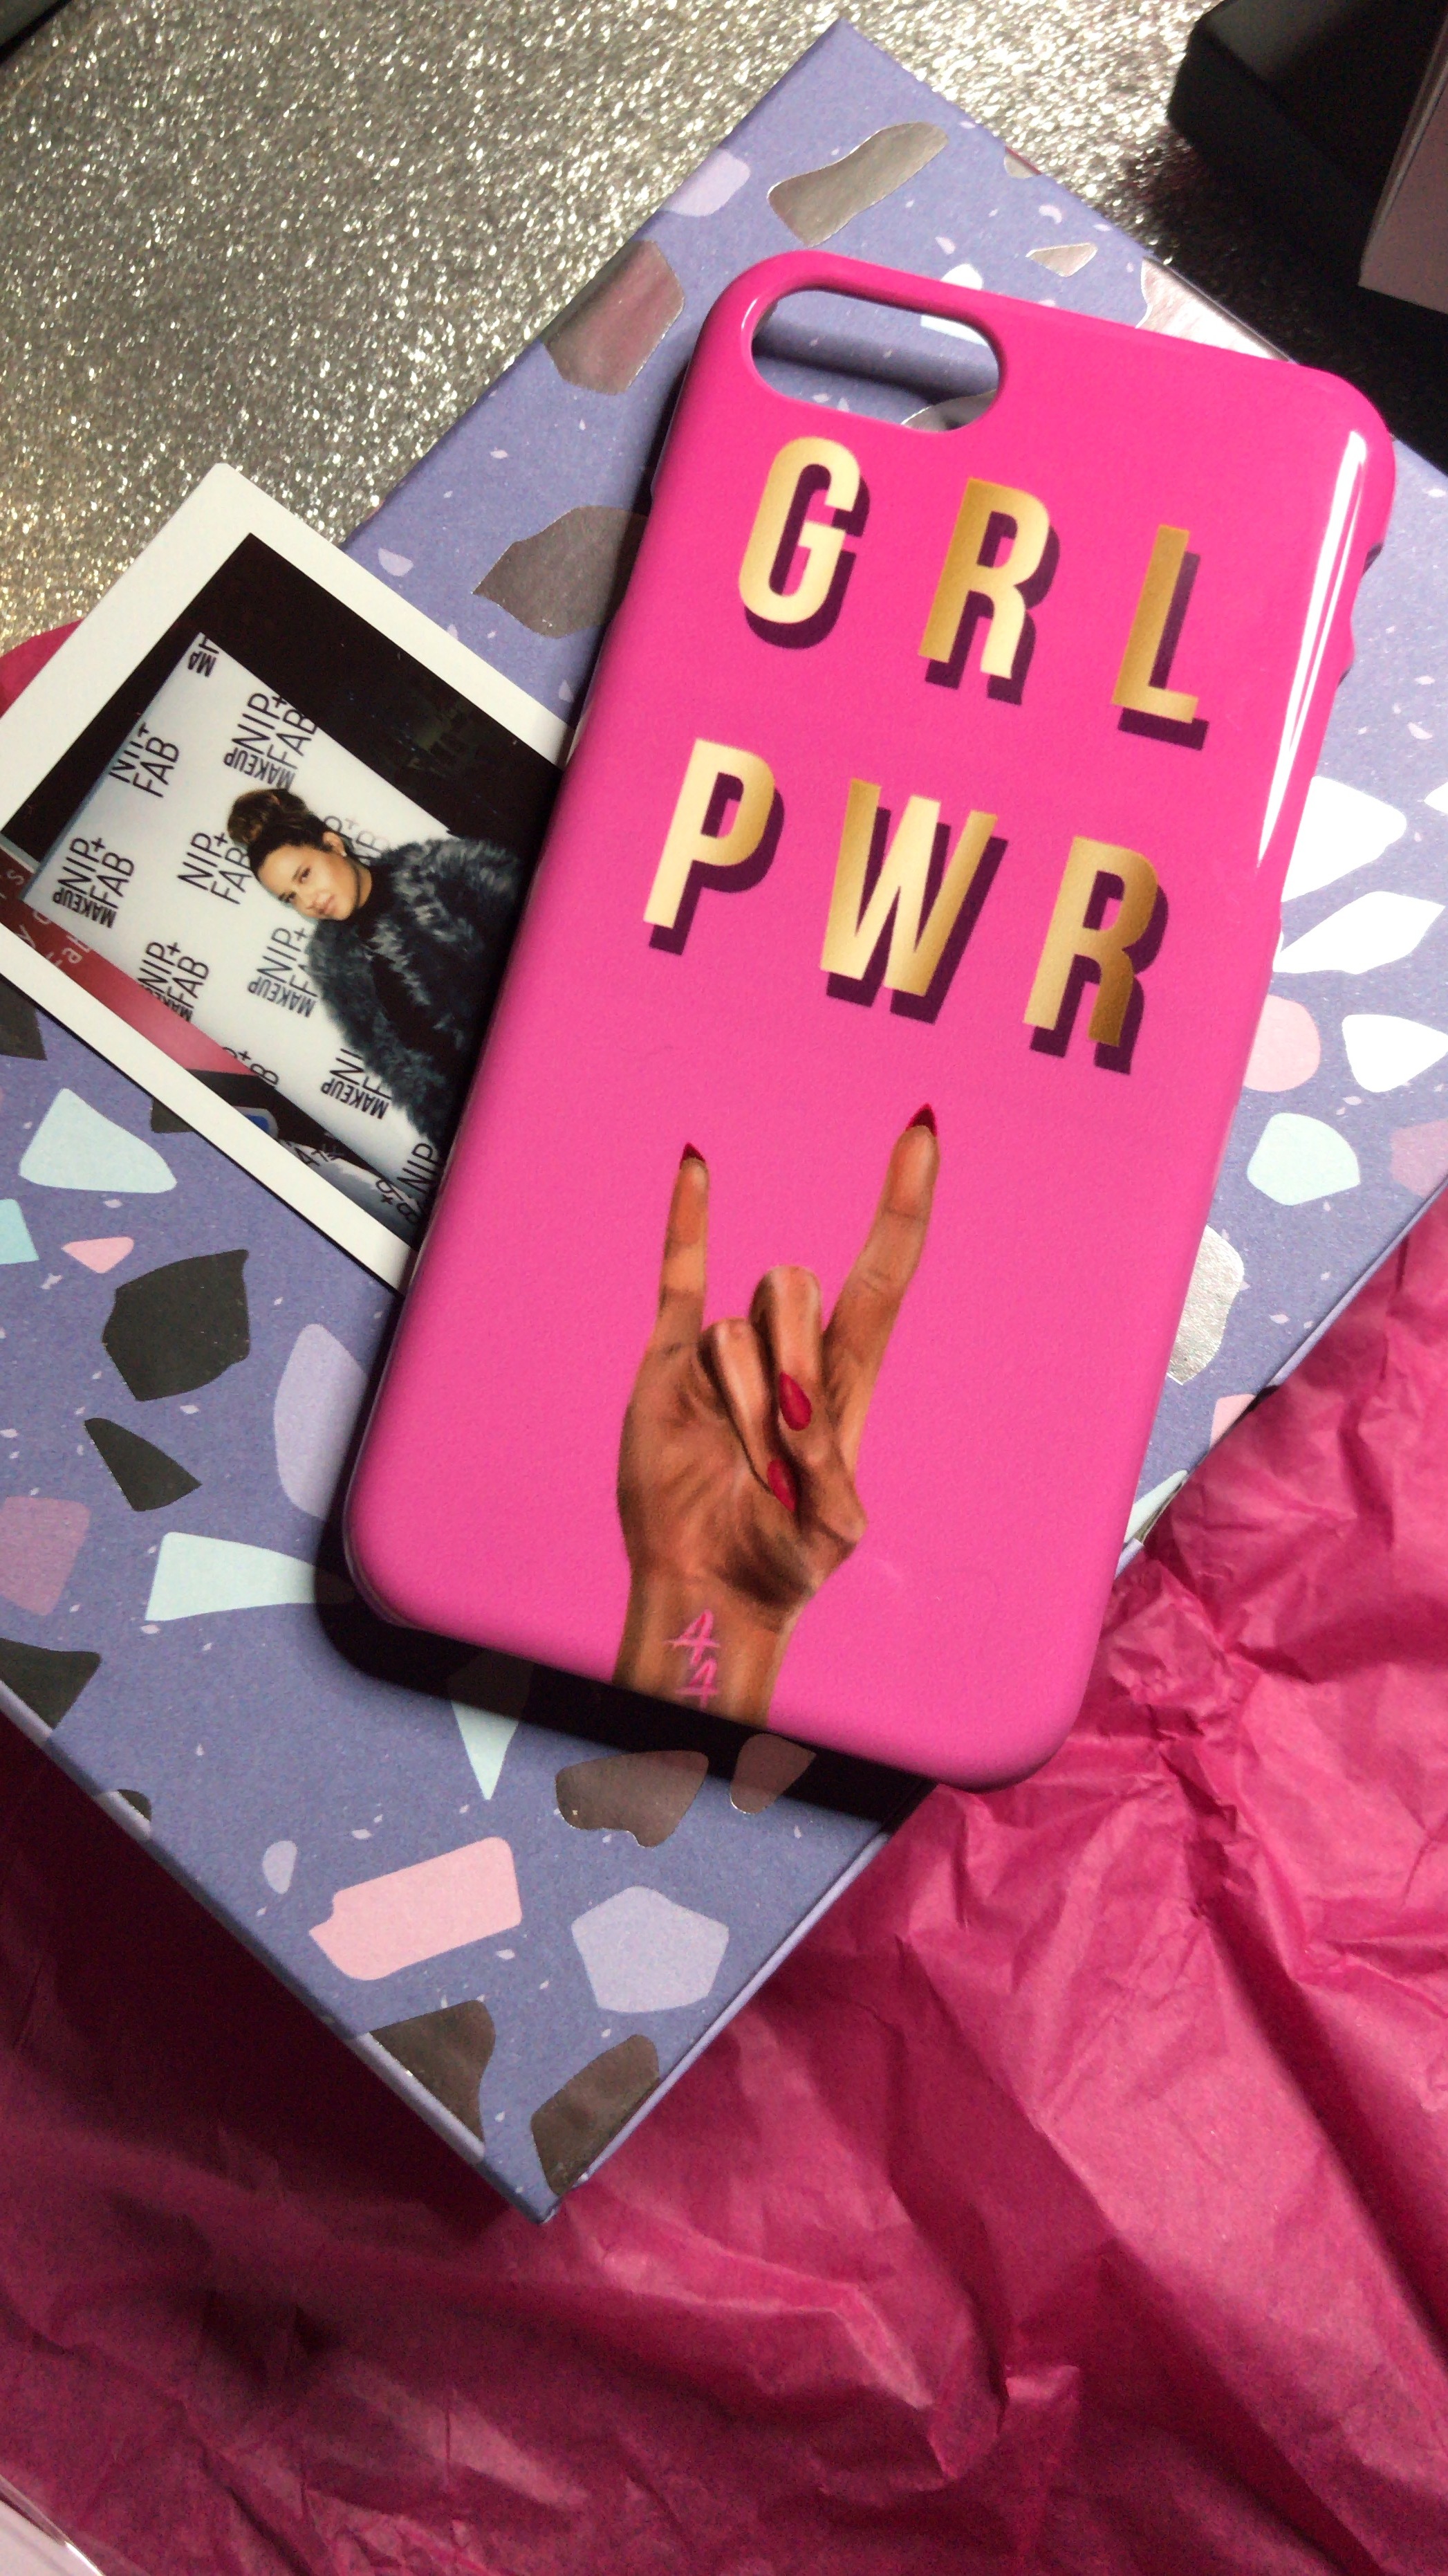 But the GRL PWR case is my absolute fave and is now keeping my iPhone 7 cute and protected!